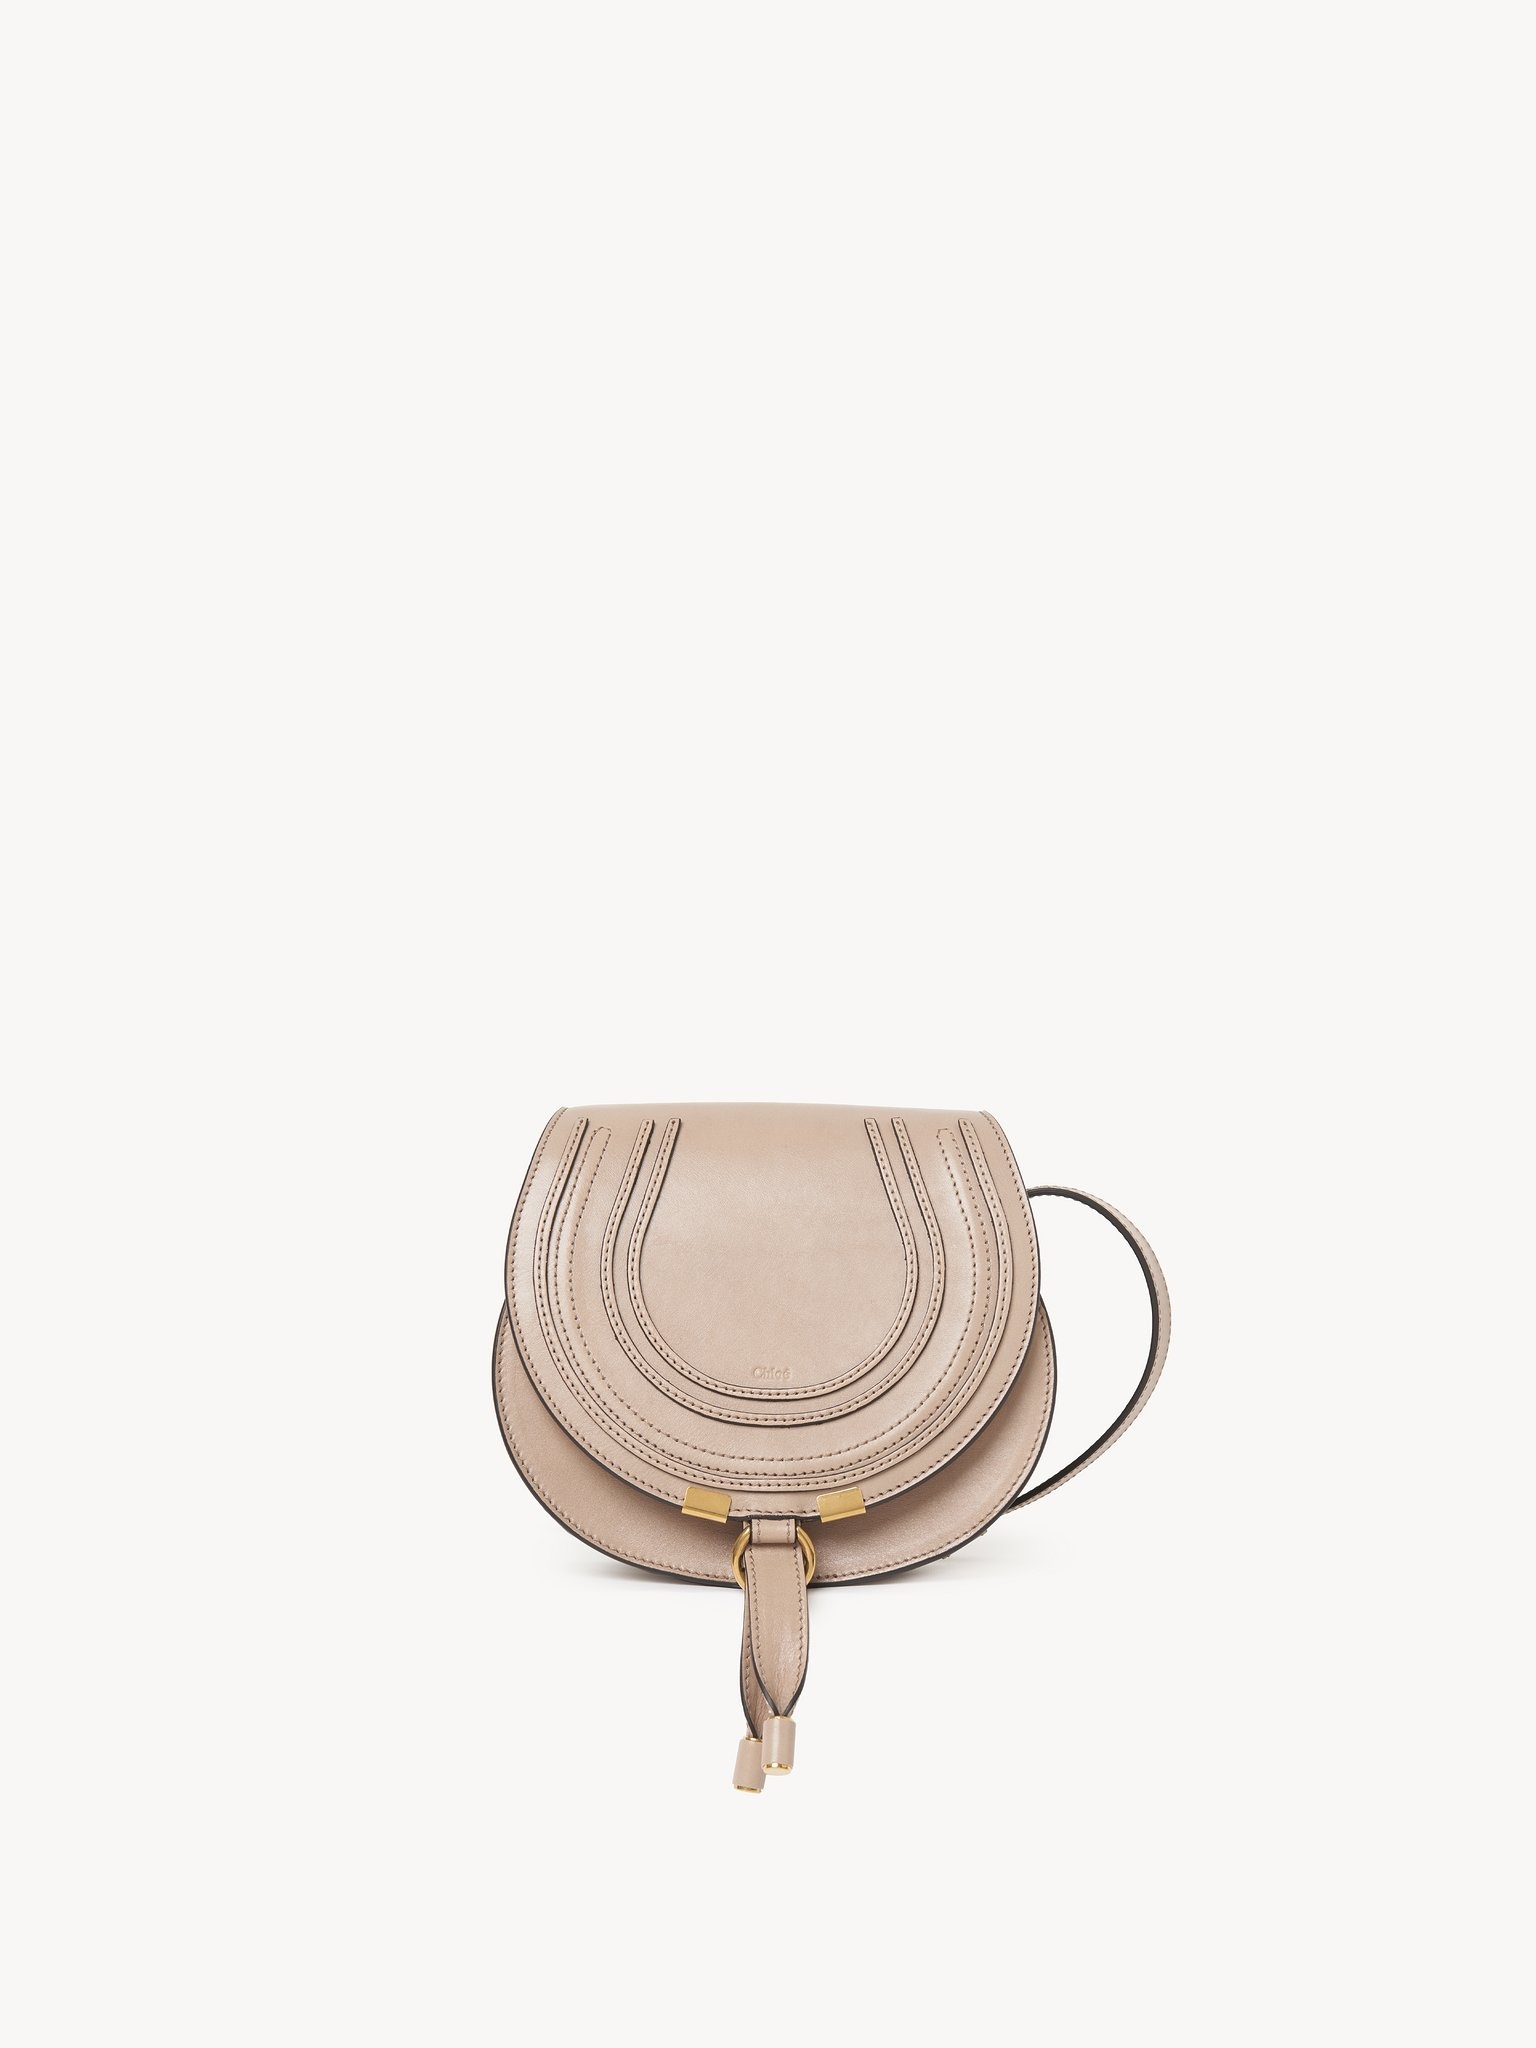 SMALL MARCIE SADDLE BAG IN SHINY LEATHER - 1